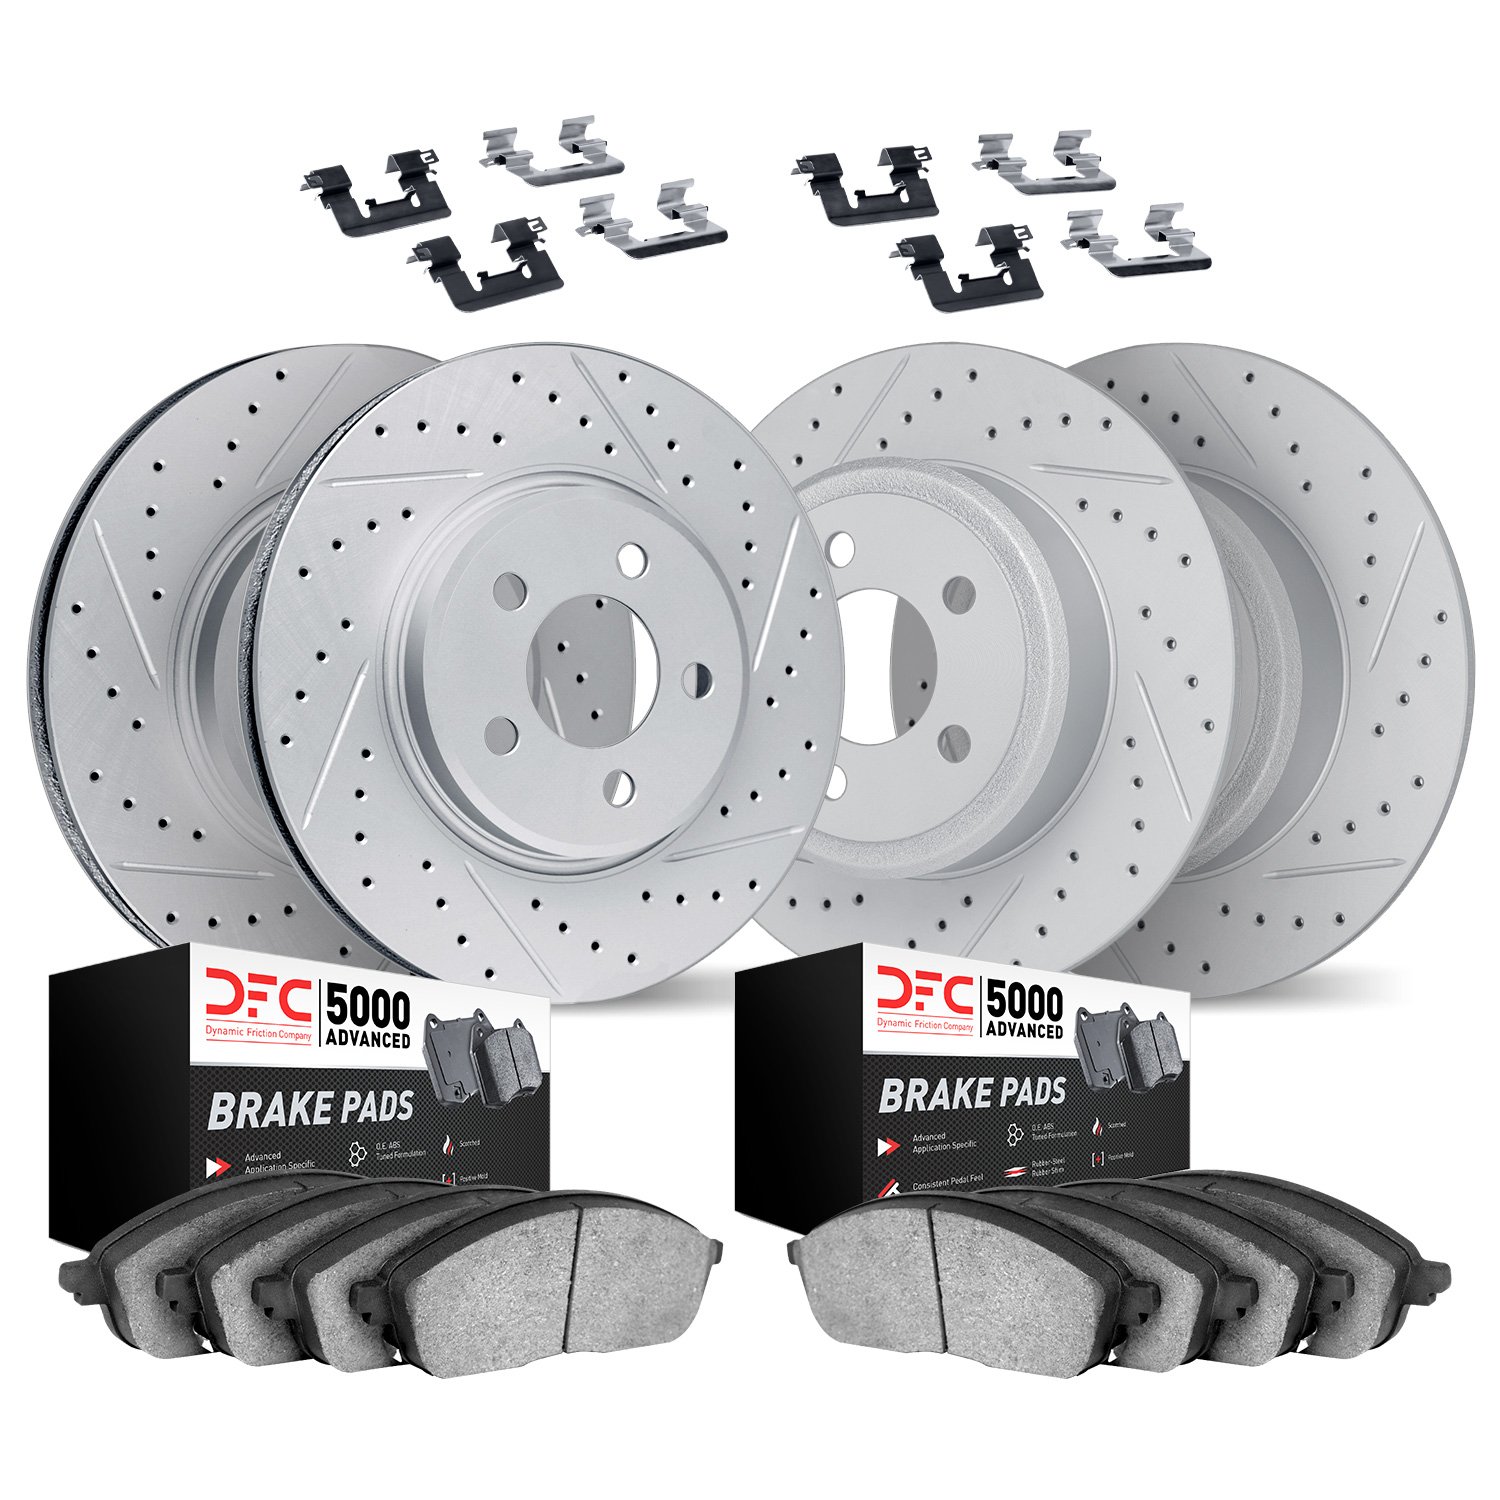 2514-27000 Geoperformance Drilled/Slotted Rotors w/5000 Advanced Brake Pads Kit & Hardware, 1976-1978 Volvo, Position: Front and